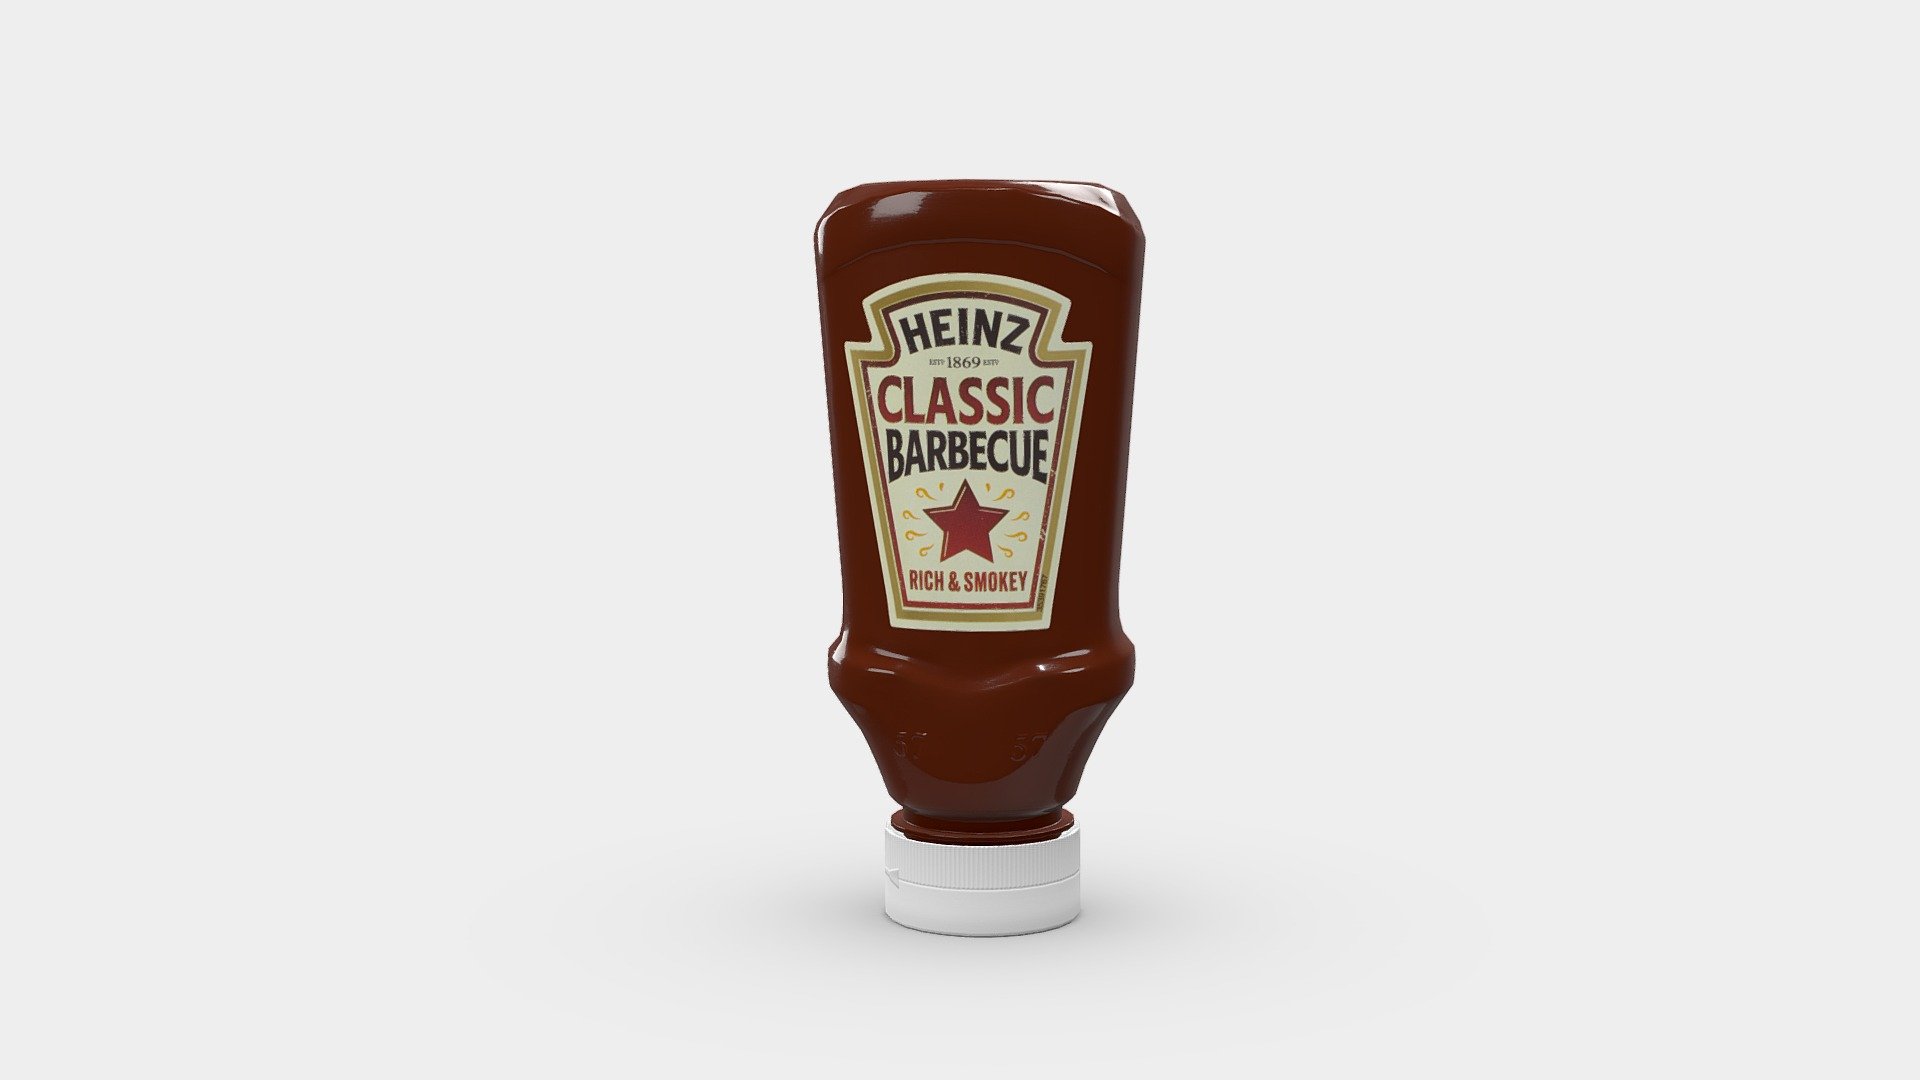 Heinz Classic Barbecue 260 g
VR and game ready for high quality Architectural Visualization
EAN: 0000050157730 - HEINZ - Barbecue sauce 260g - 3D model by Invrsion 3d model